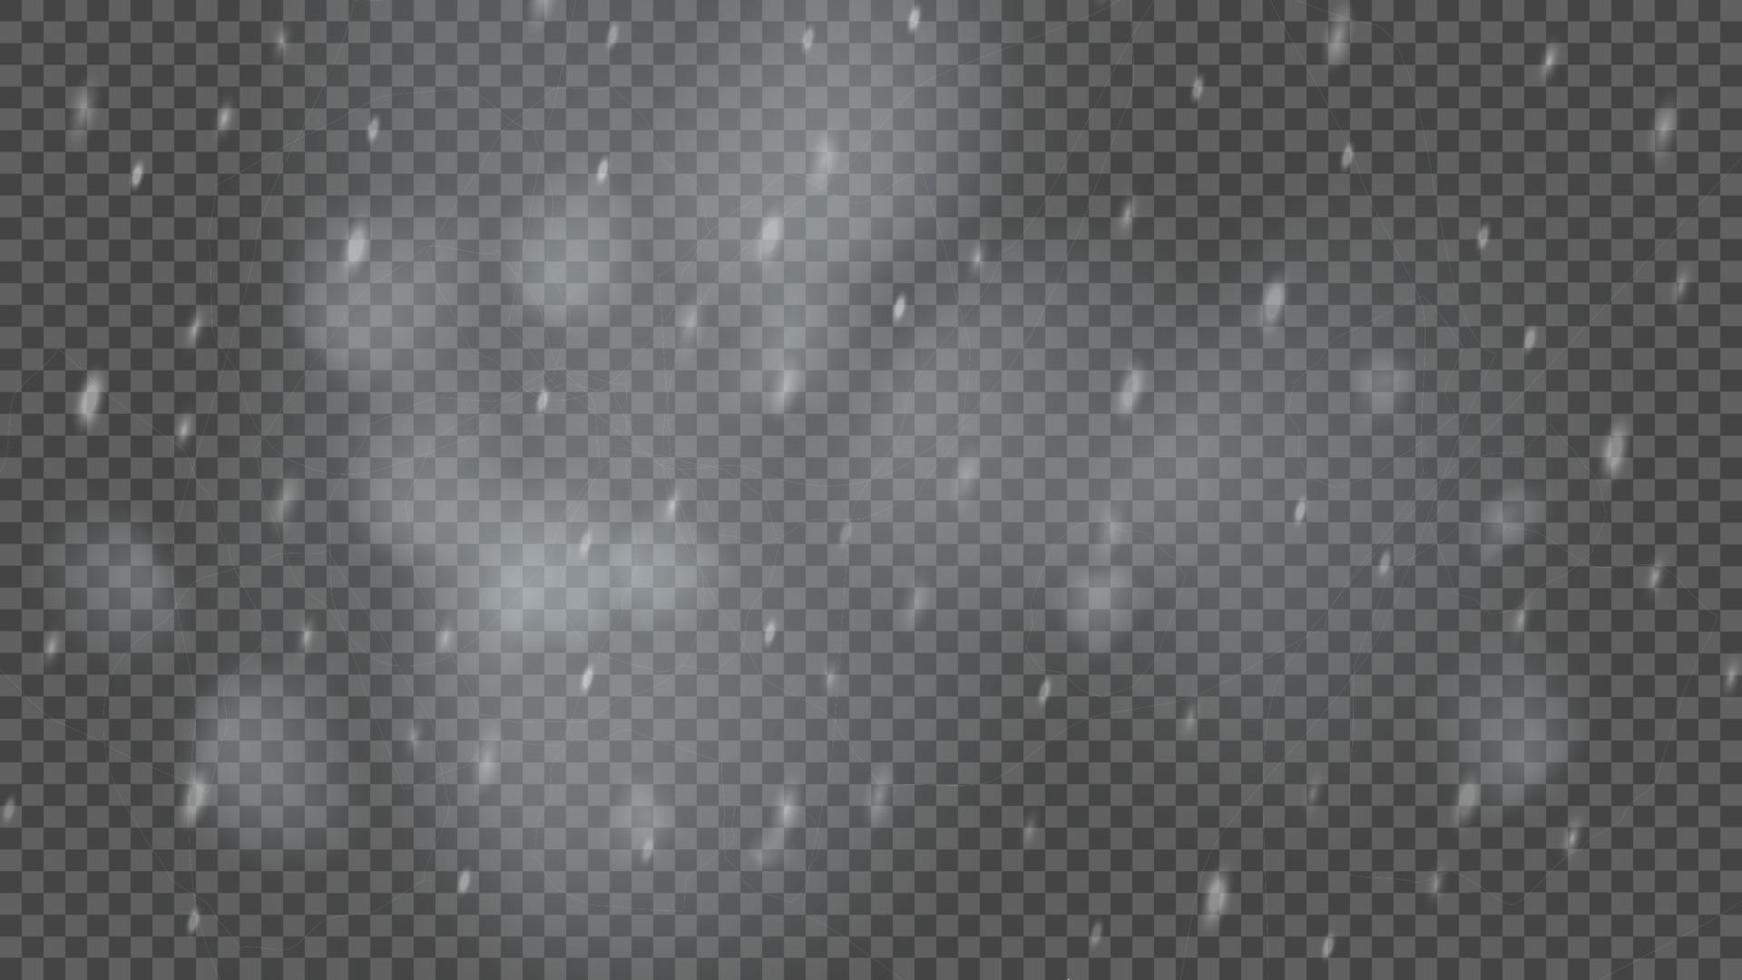 Snowstorm and falling snowflakes on transparent background. Blizzard of white snowflakes and Christmas snow. Vector illustration